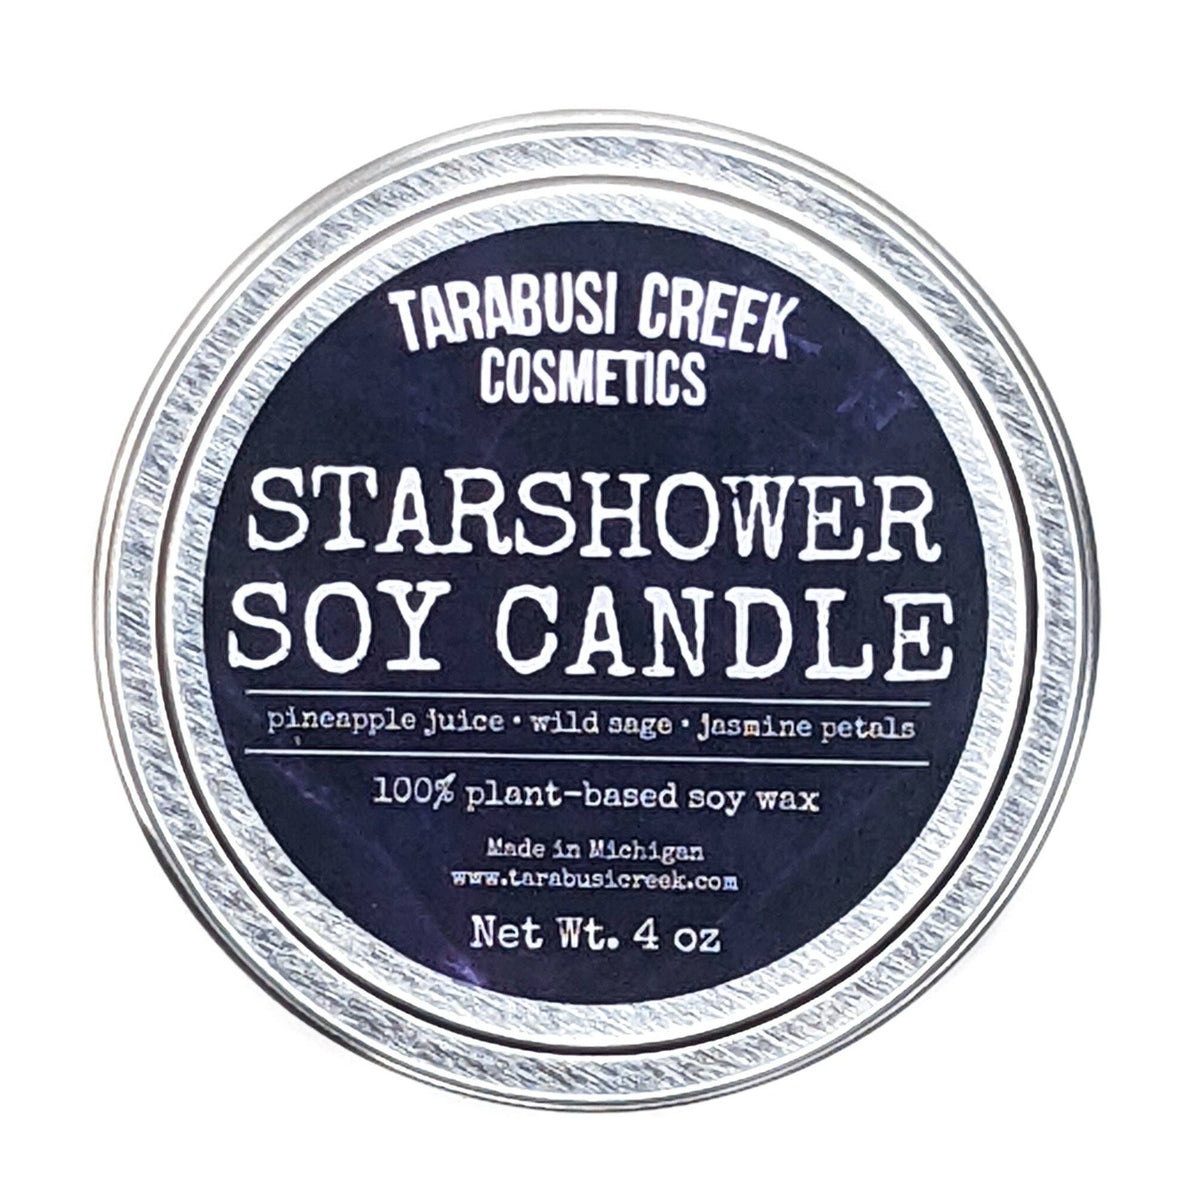 Starshower Soy Candle